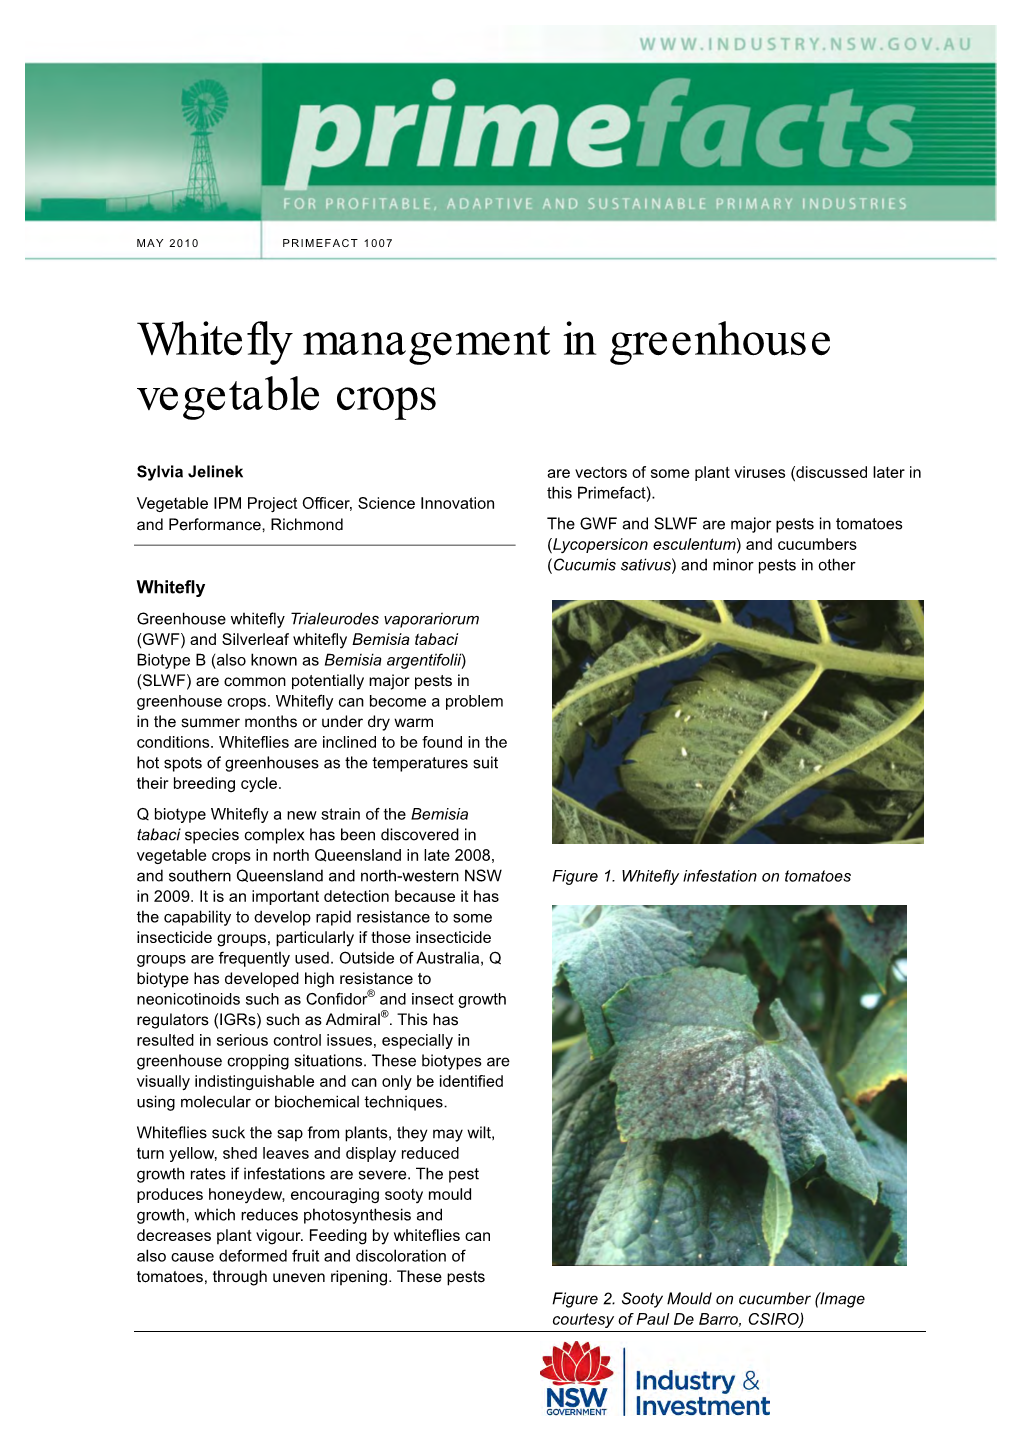 Whitefly Management in Greenhouse Vegetable Crops